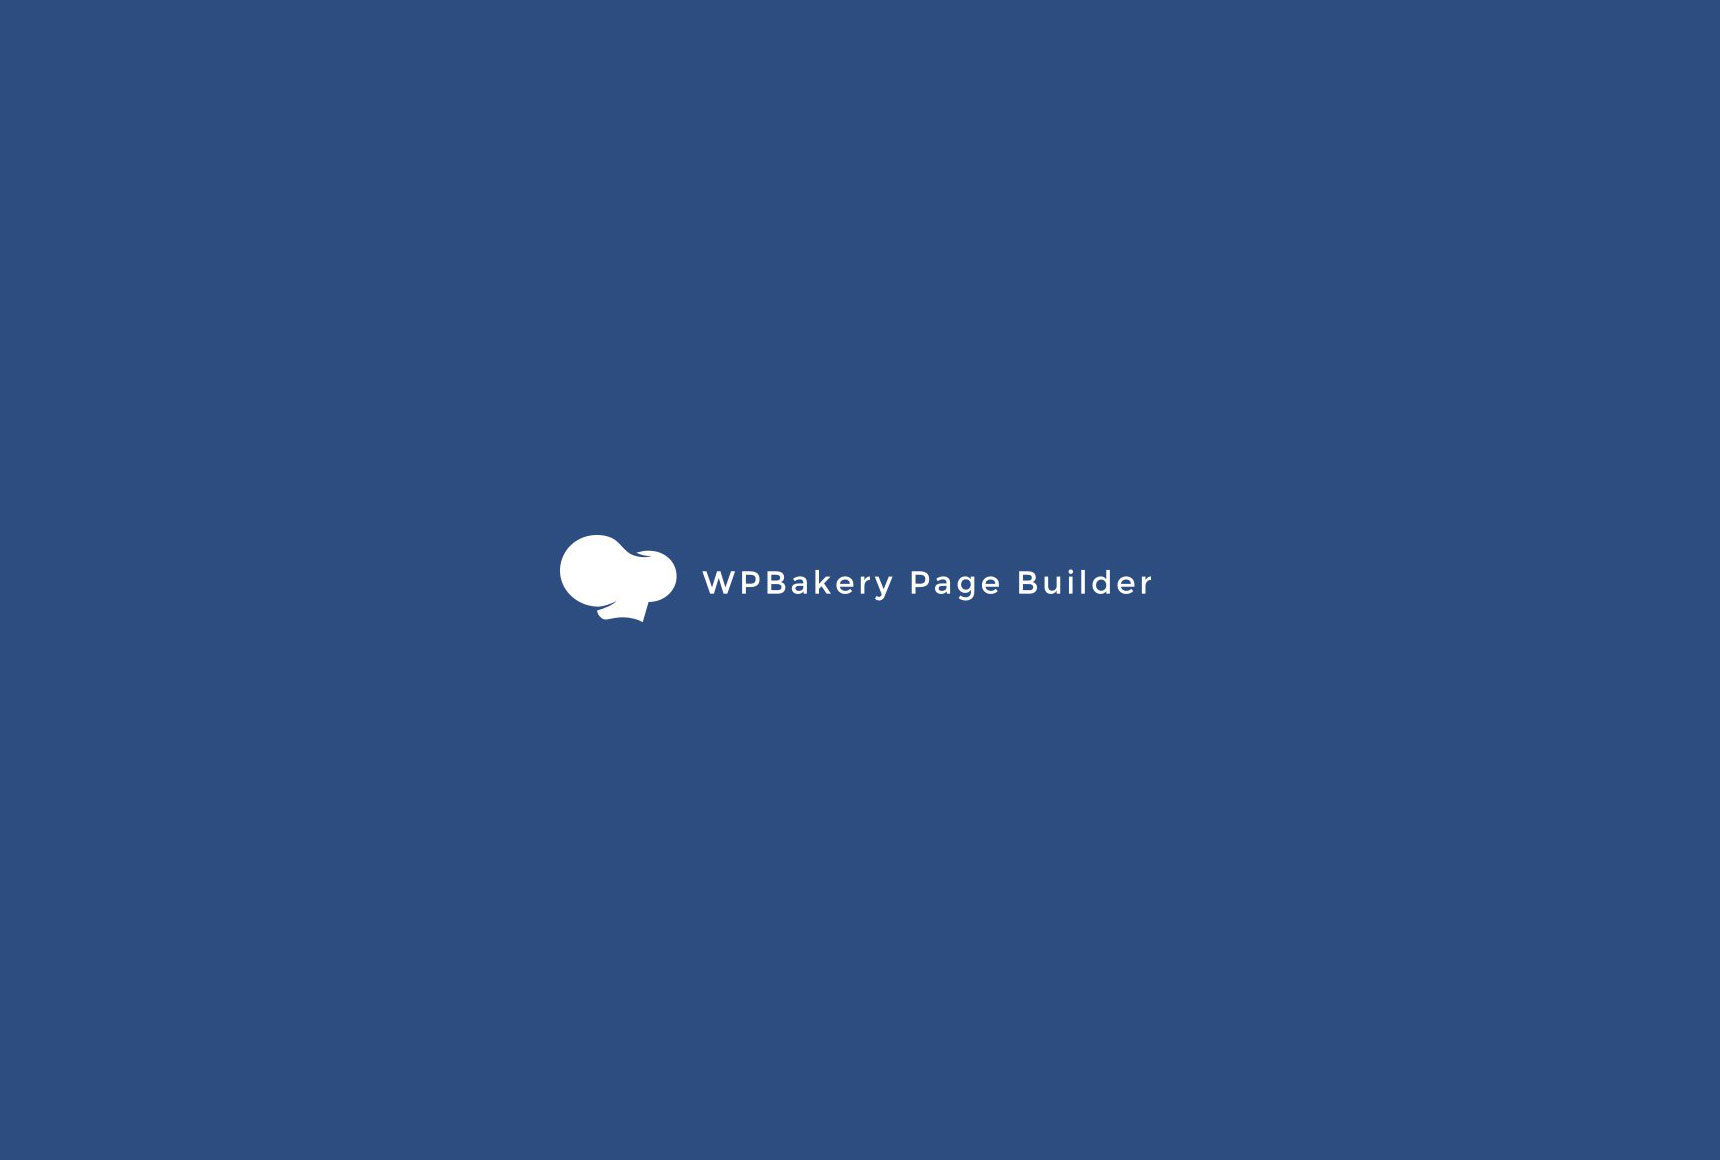 WPBakery Page Builder masthead image